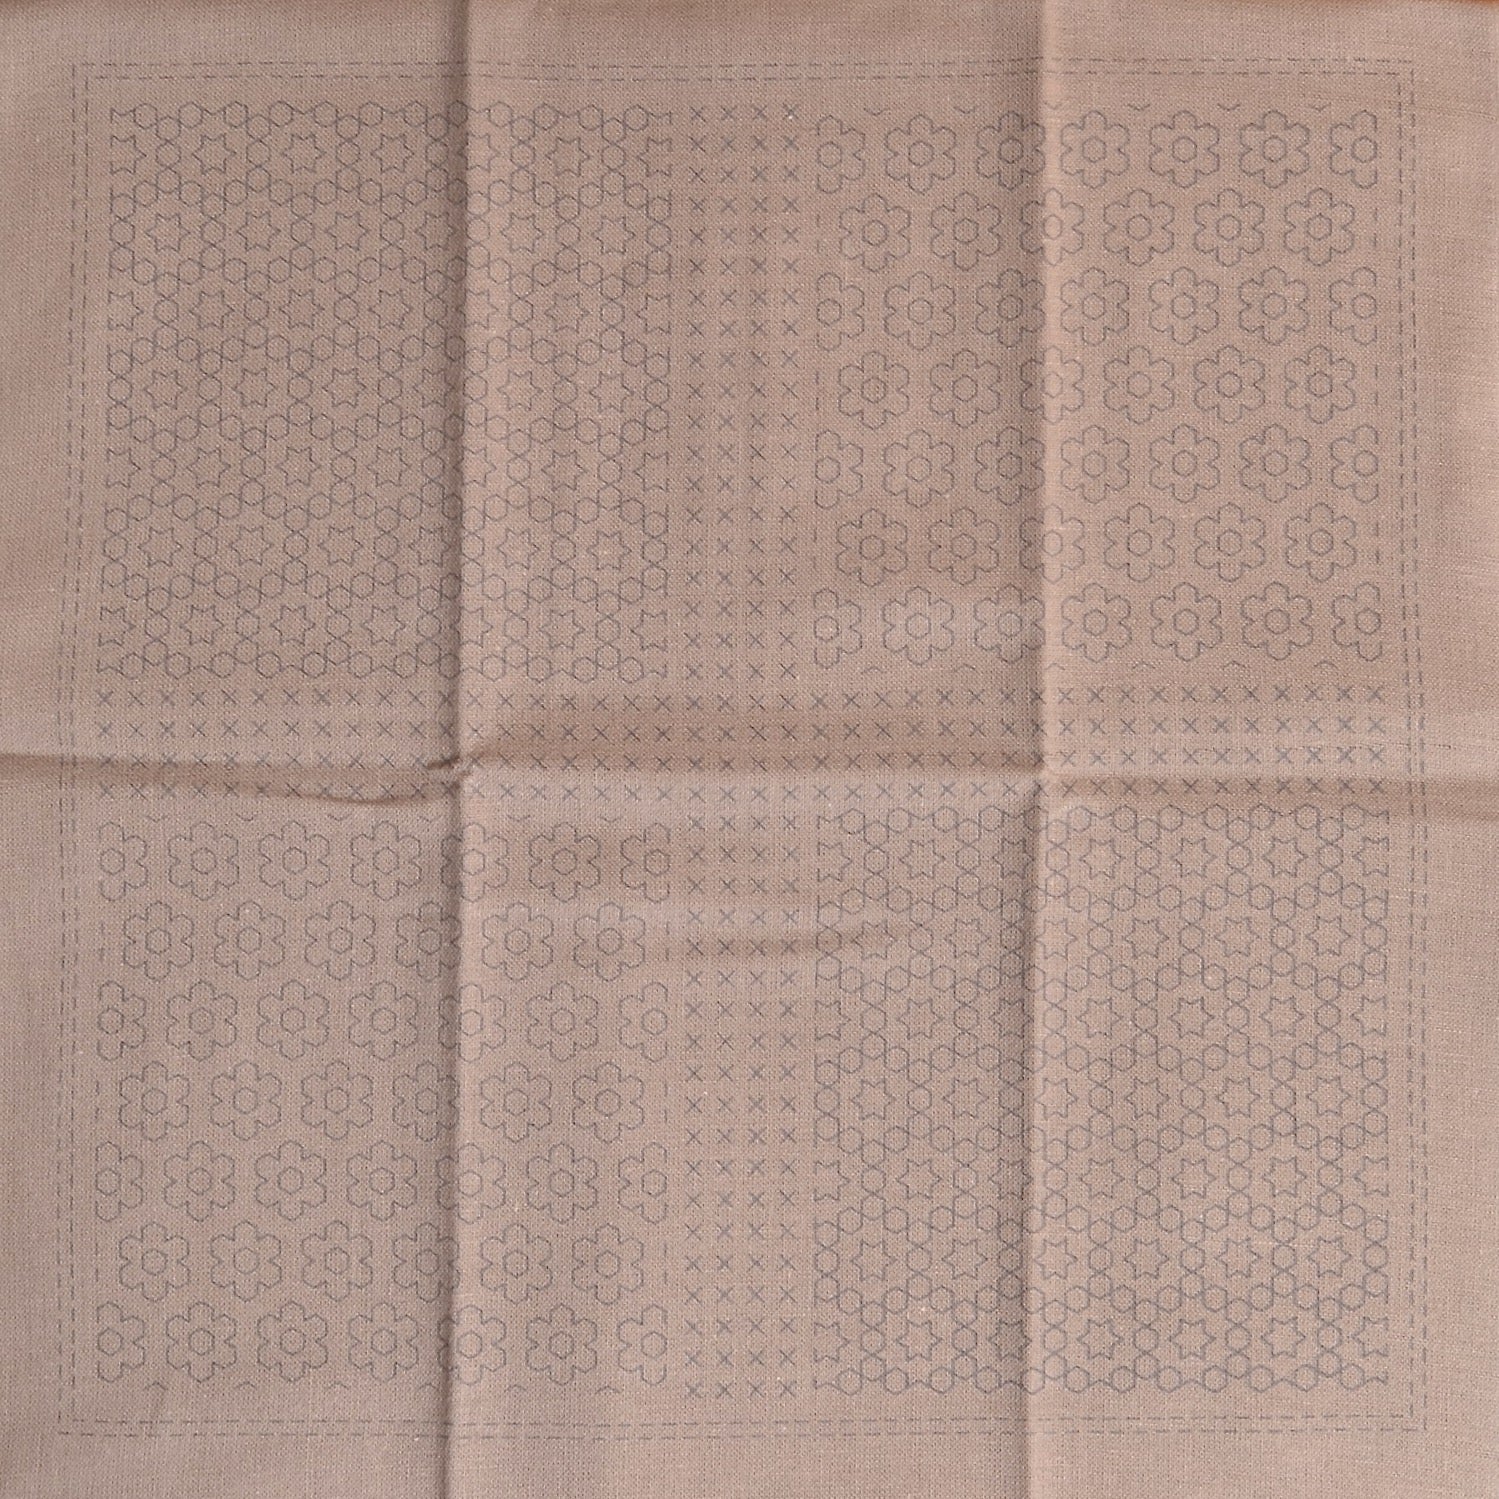 Florets pattern on taupe cotton fabric